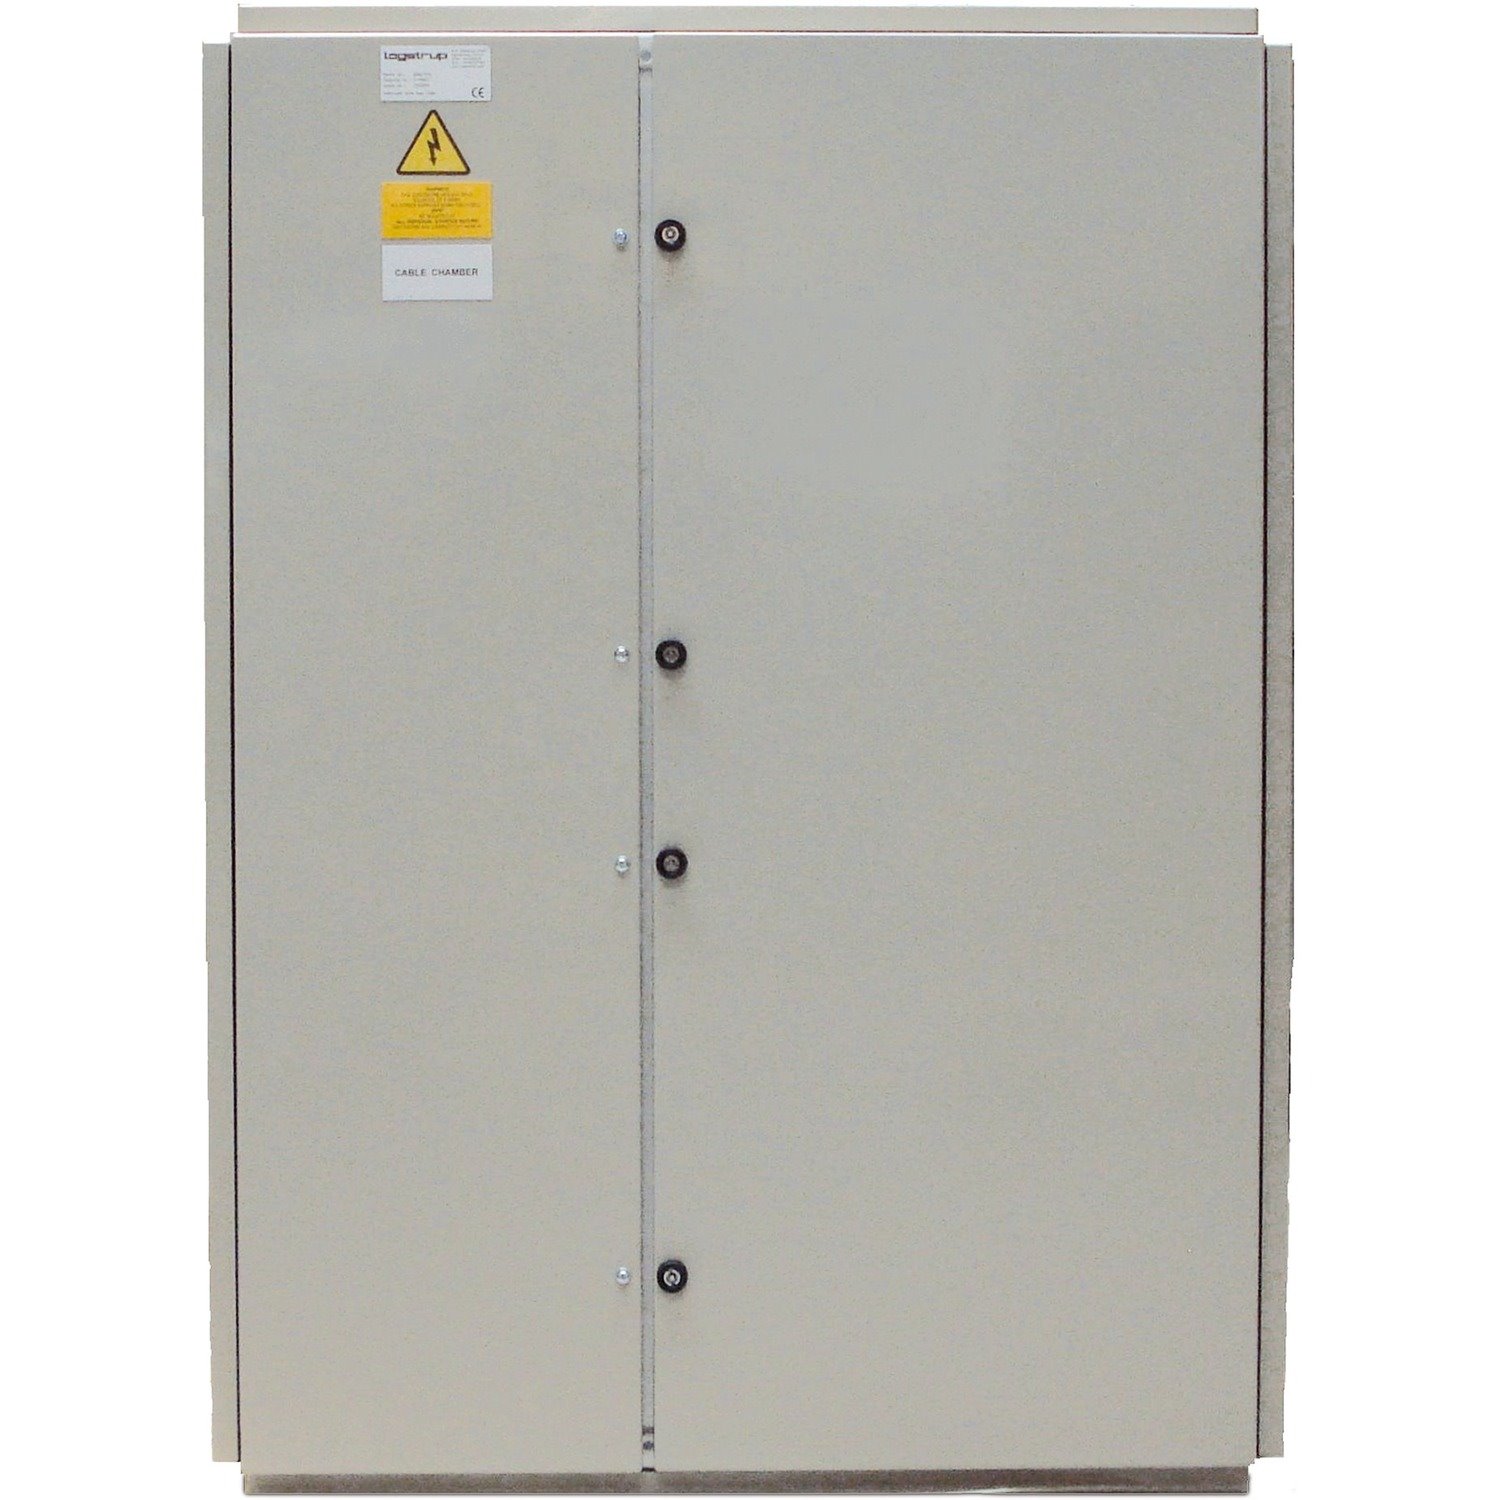 APC by Schneider Electric Parallel Maintenance Bypass for 2 UPS (1+1) 3:1 15-20kVA Wallmount